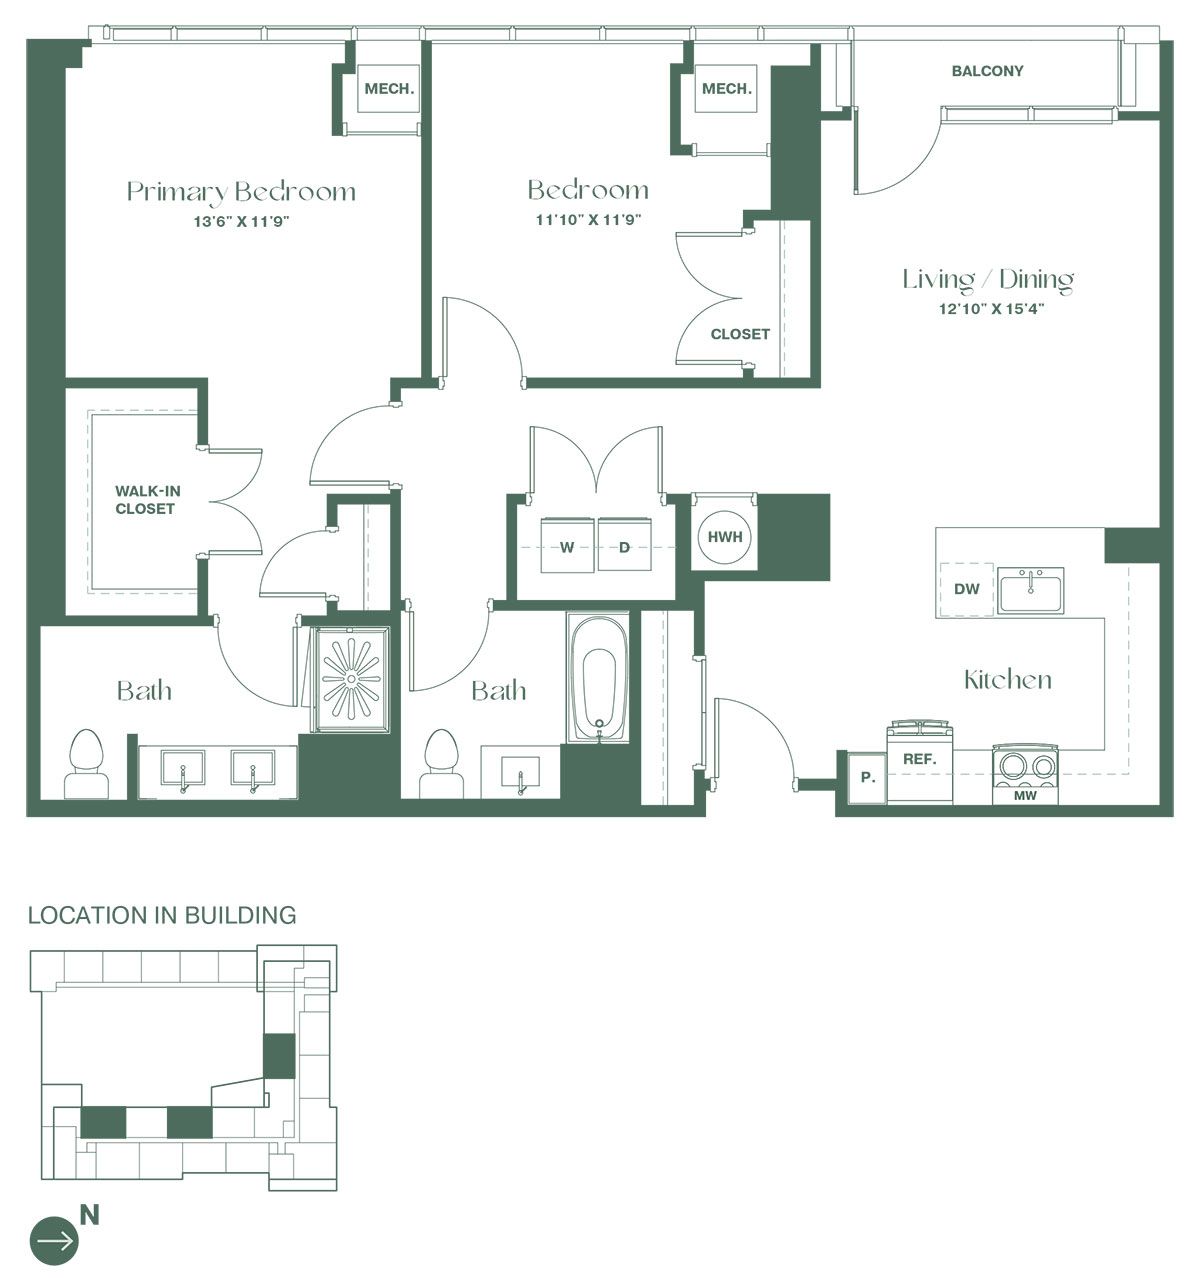 Floorplan for a two-bedroom, two-bathroom apartment at RVR at Xchange opens into a fully equipped kitchen w/ dishwasher and pantry. Continuing into the apartment there is a spacious living and dining room area, two bedrooms and 2 full bathrooms.